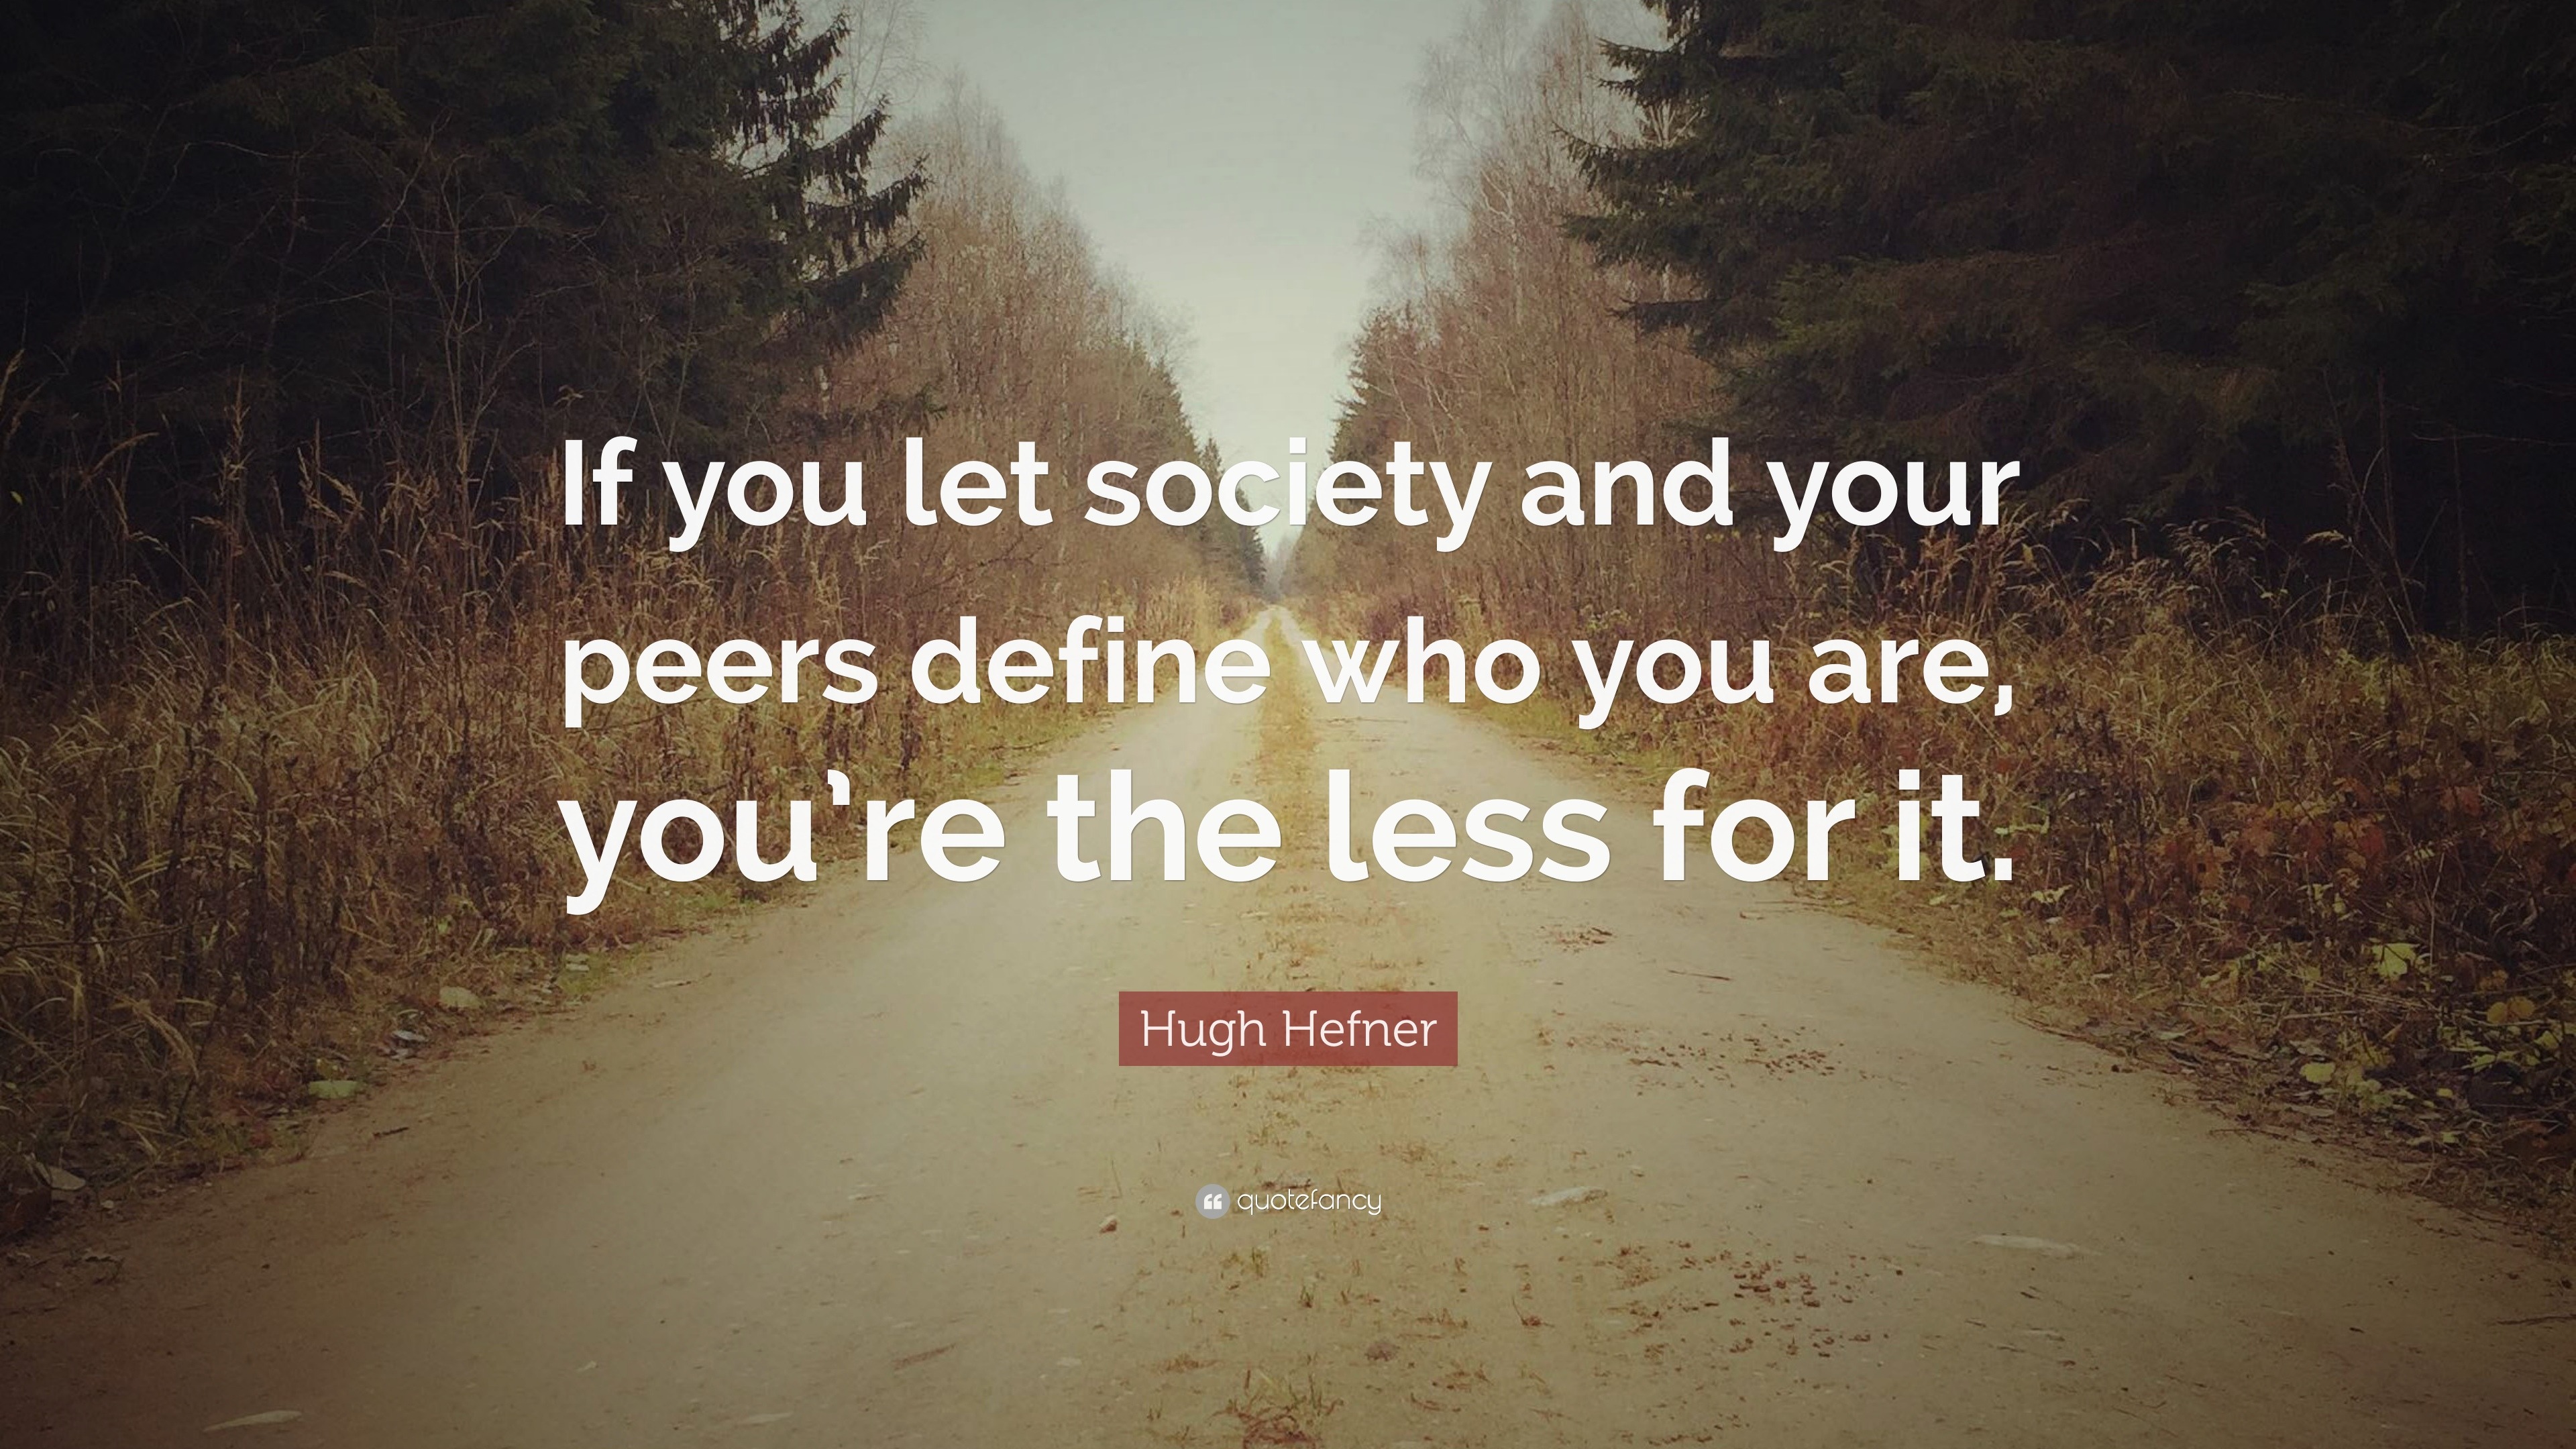 Hugh Hefner Quote: “If you let society and your peers define who you